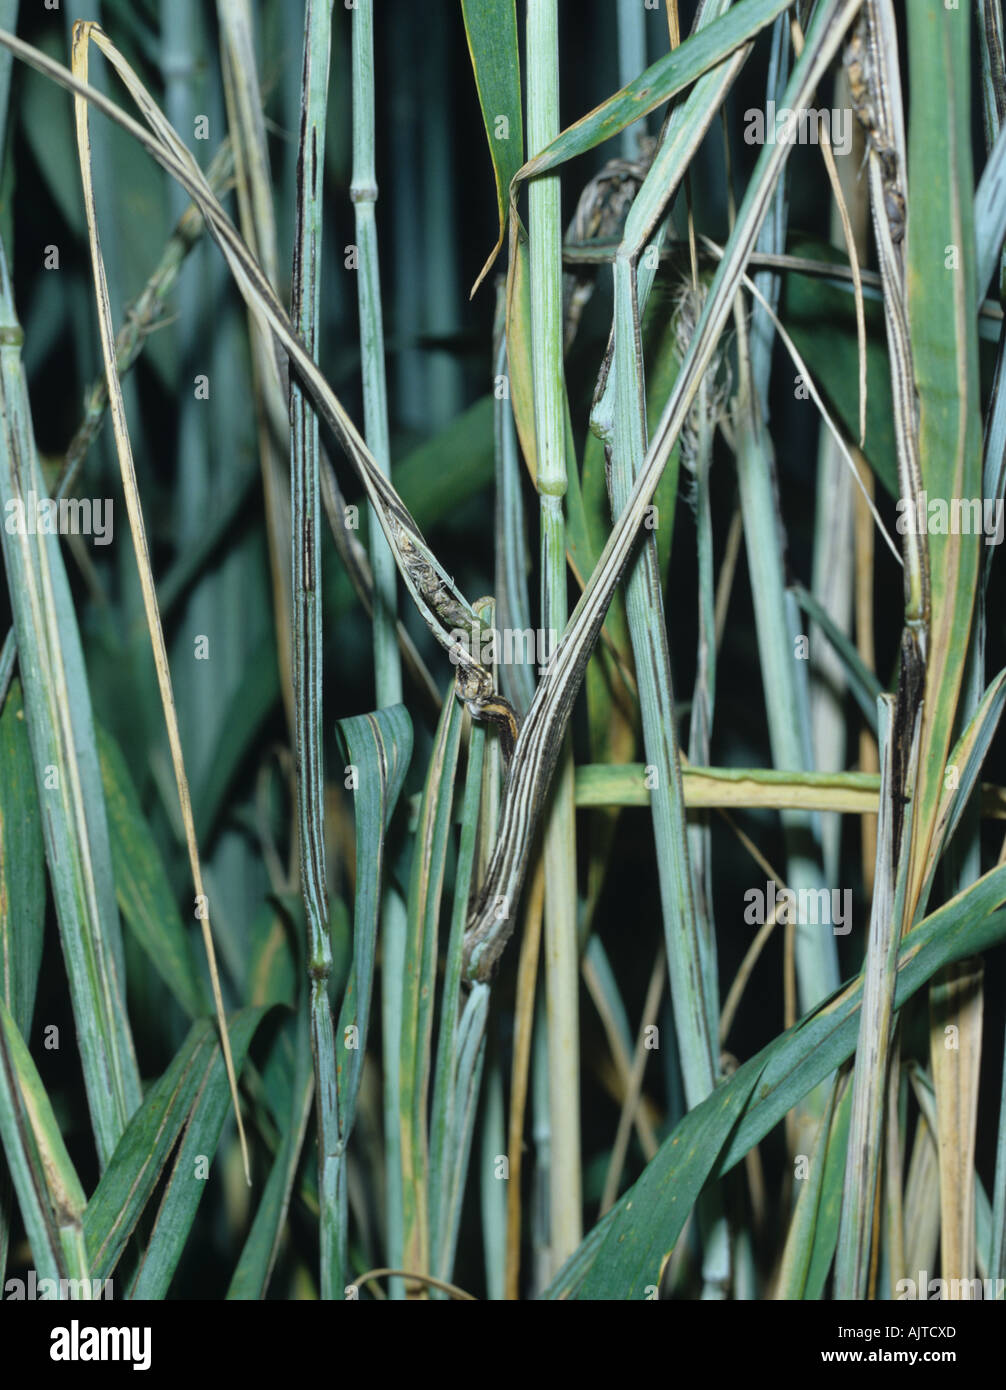 Stem stalk or striped smut Urocystis occultata on rye flagleaves trapped ears Stock Photo